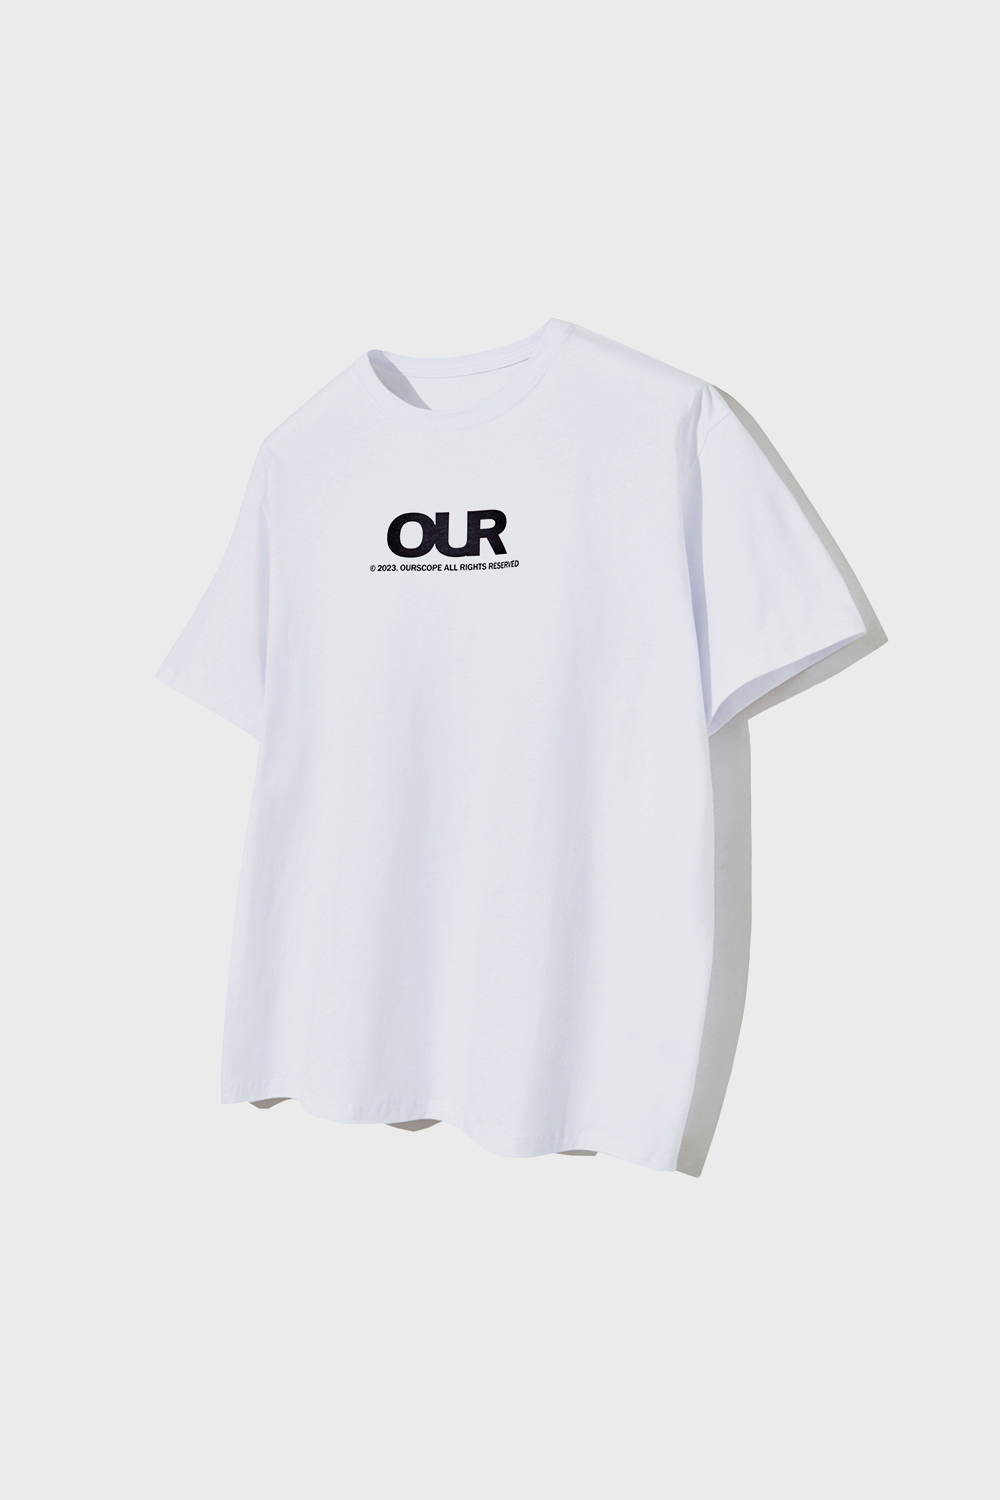 OUR Graphic T-shirts (White)